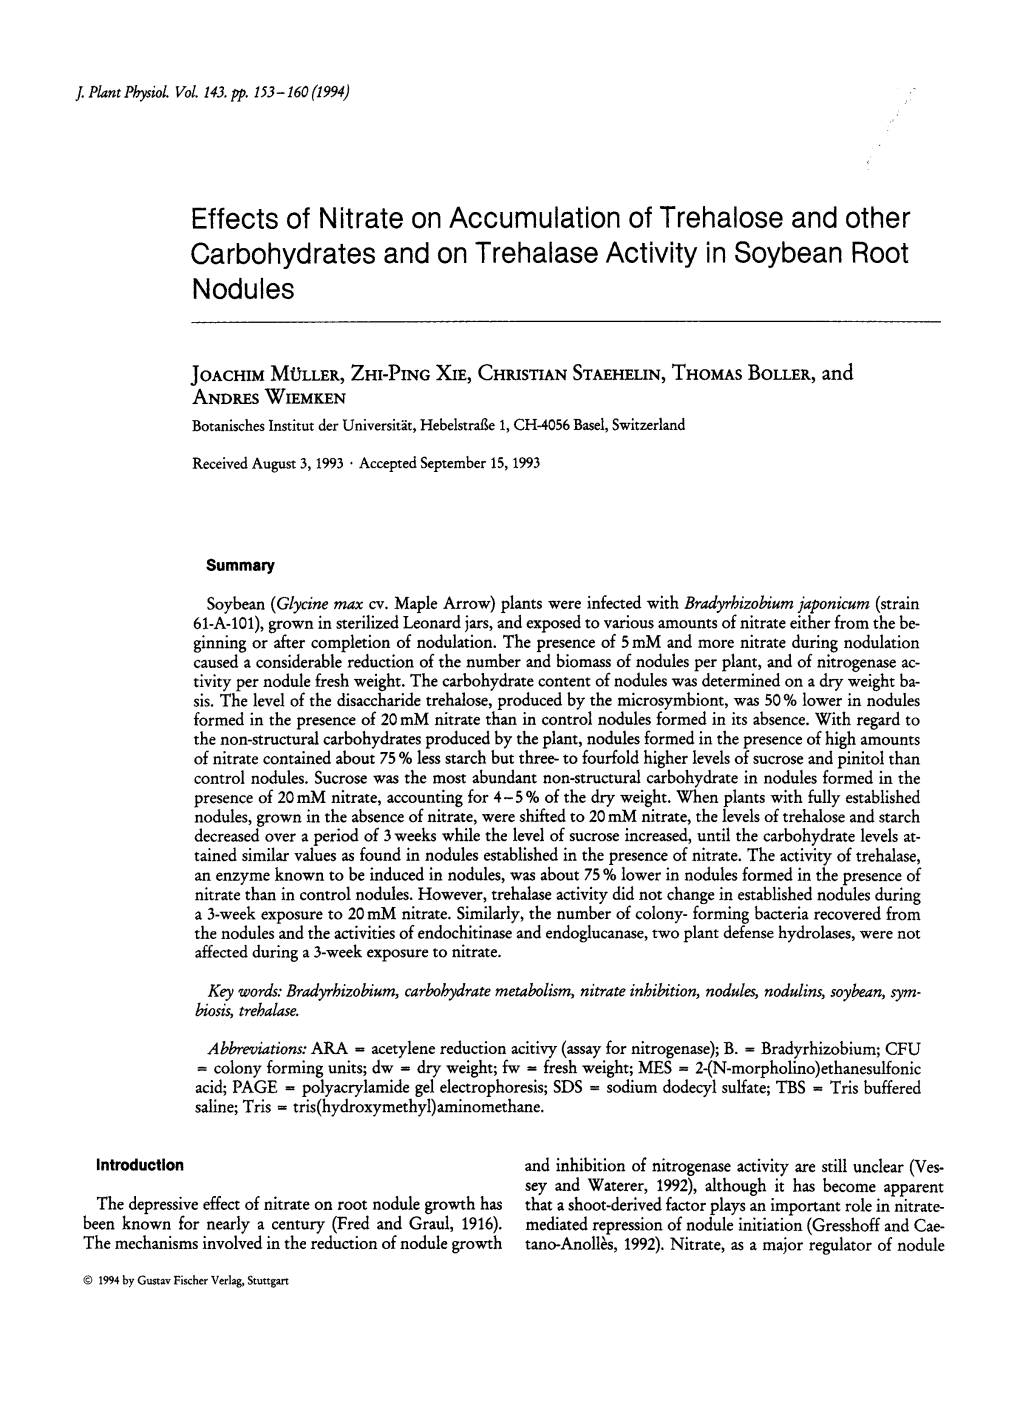 Effects of Nitrate on Accumulation of Trehalose and Other Carbohydrates and on Trehalase Activity in Soybean Root Nodules